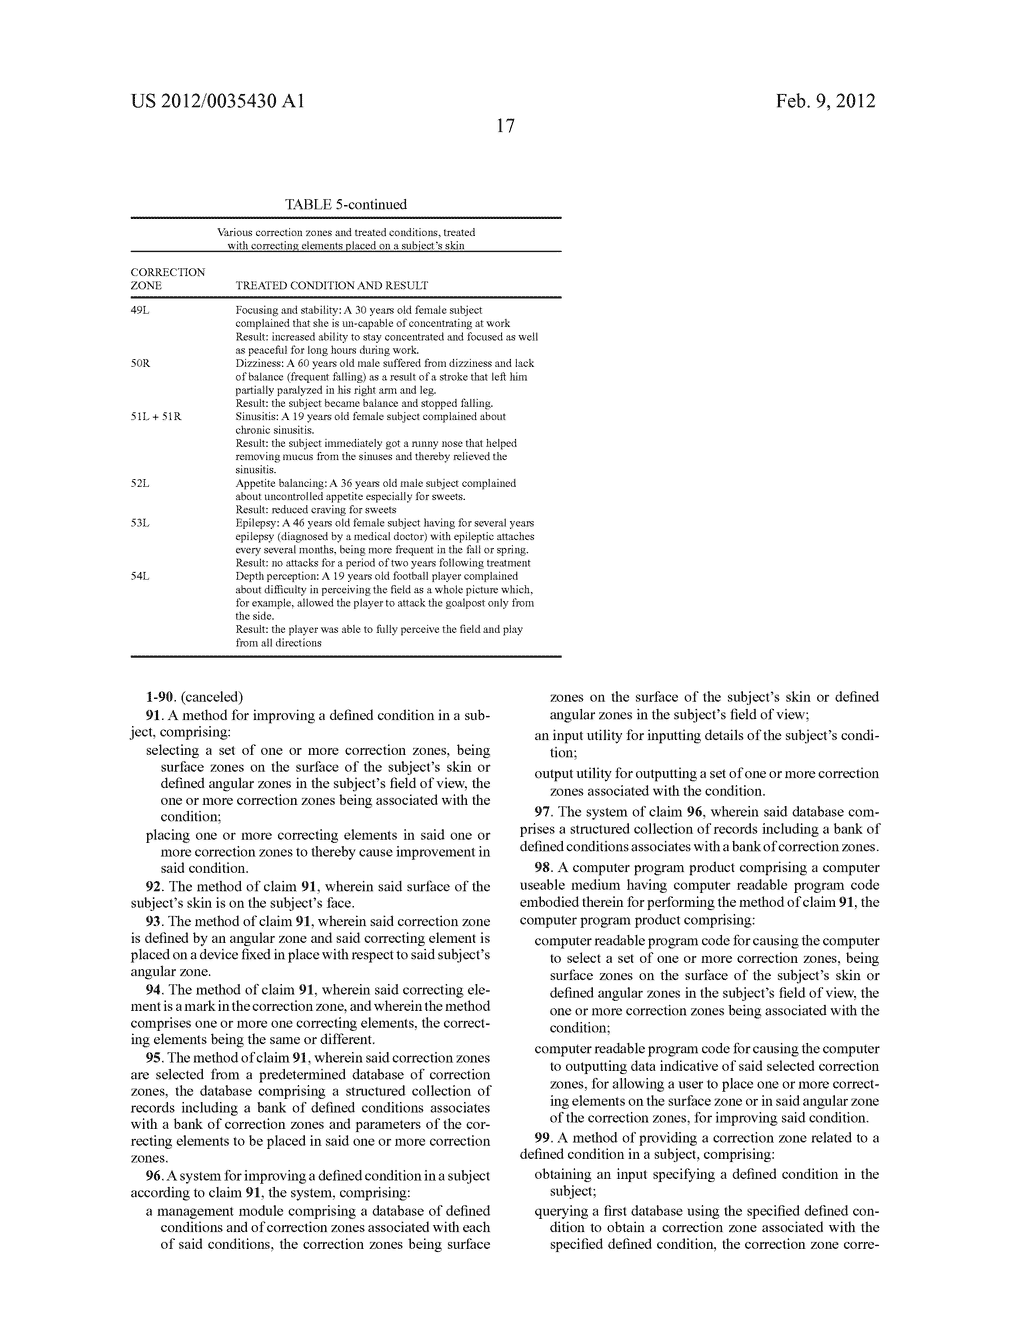 METHODS AND SYSTEMS FOR DIAGNOSIS AND TREATMENT OF A DEFINED CONDITION,     AND METHODS FOR OPERATING SUCH SYSTEMS - diagram, schematic, and image 26